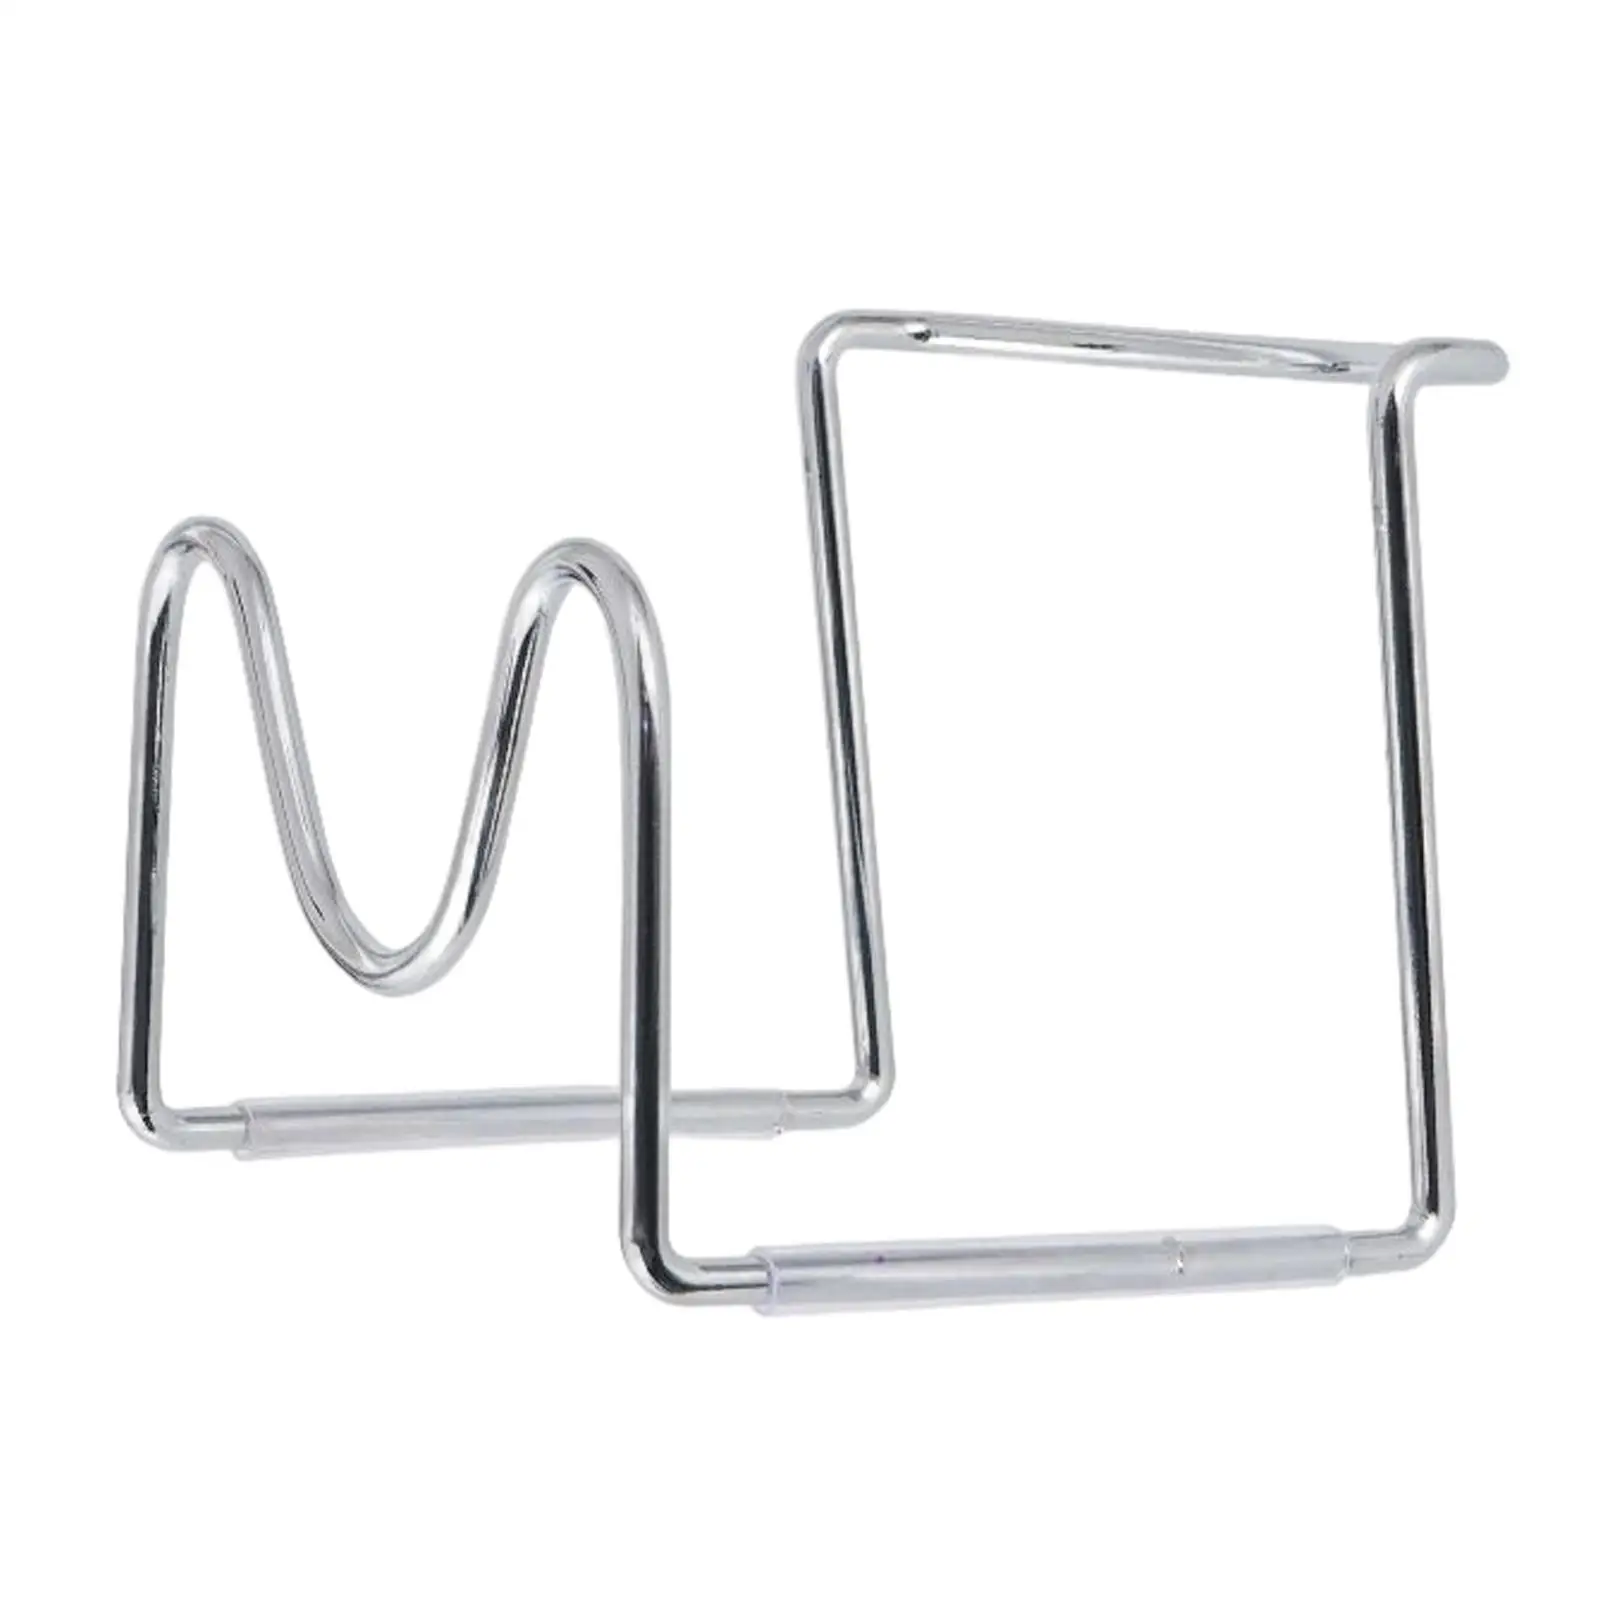 Stainless Jug Stand Beverage Holder Cradle Rack for Party